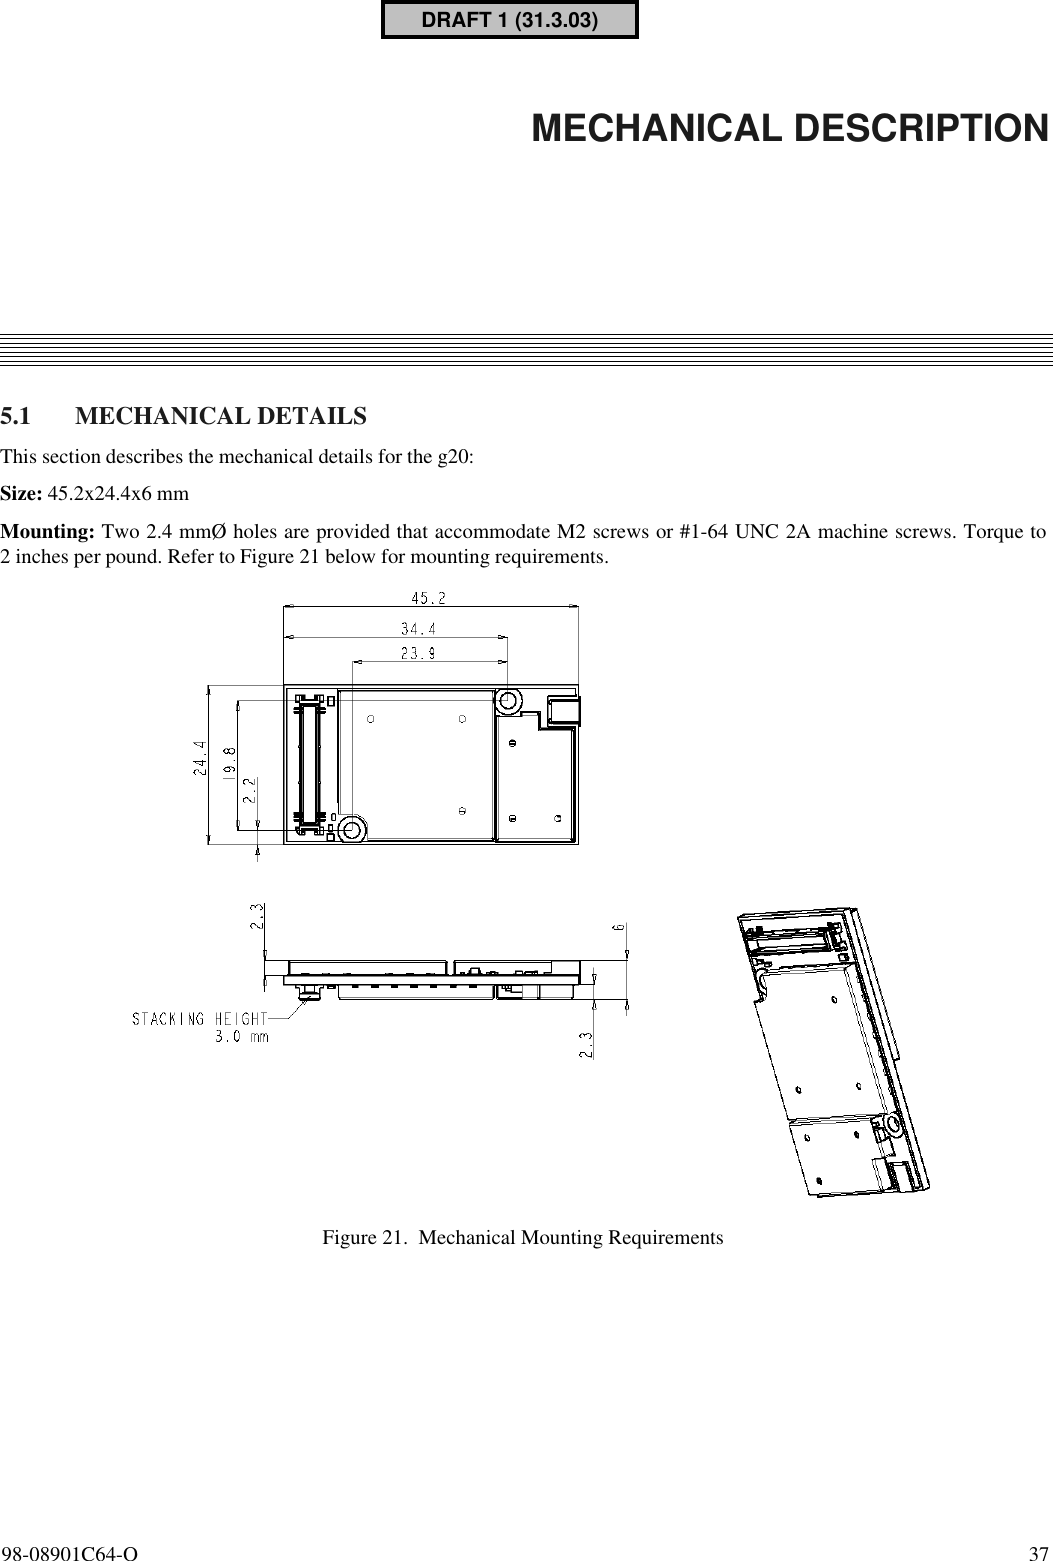 98-08901C64-O  375. MECHANICAL DESCRIPTION5.1 MECHANICAL DETAILSThis section describes the mechanical details for the g20:Size: 45.2x24.4x6 mmMounting: Two 2.4 mmØ holes are provided that accommodate M2 screws or #1-64 UNC 2A machine screws. Torque to2 inches per pound. Refer to Figure 21 below for mounting requirements.Figure 21. Mechanical Mounting RequirementsDRAFT 1 (31.3.03)